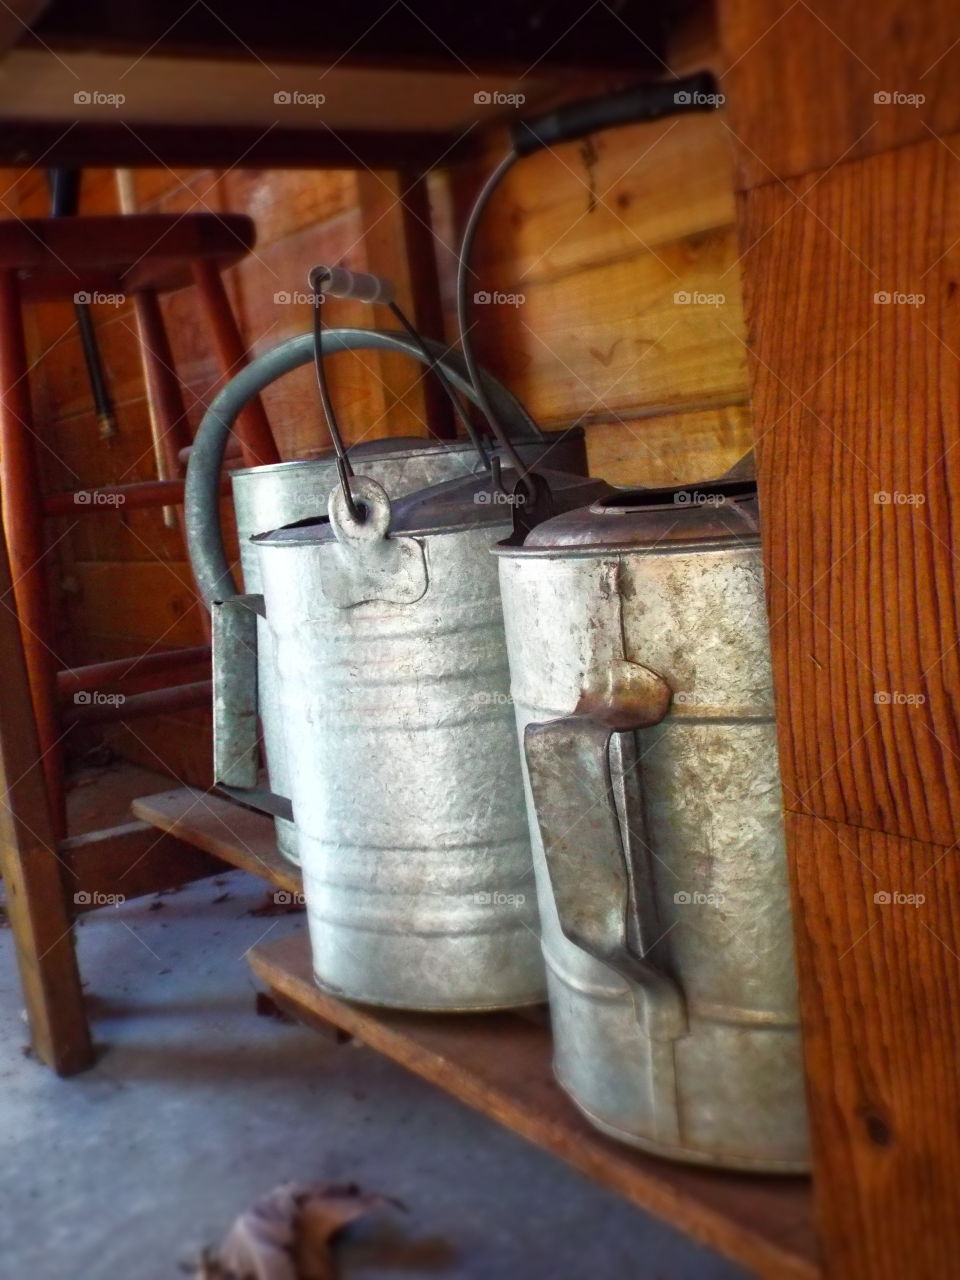 Closeup of vintage rusty galvanized metal watering cans on shelf under potting bench
